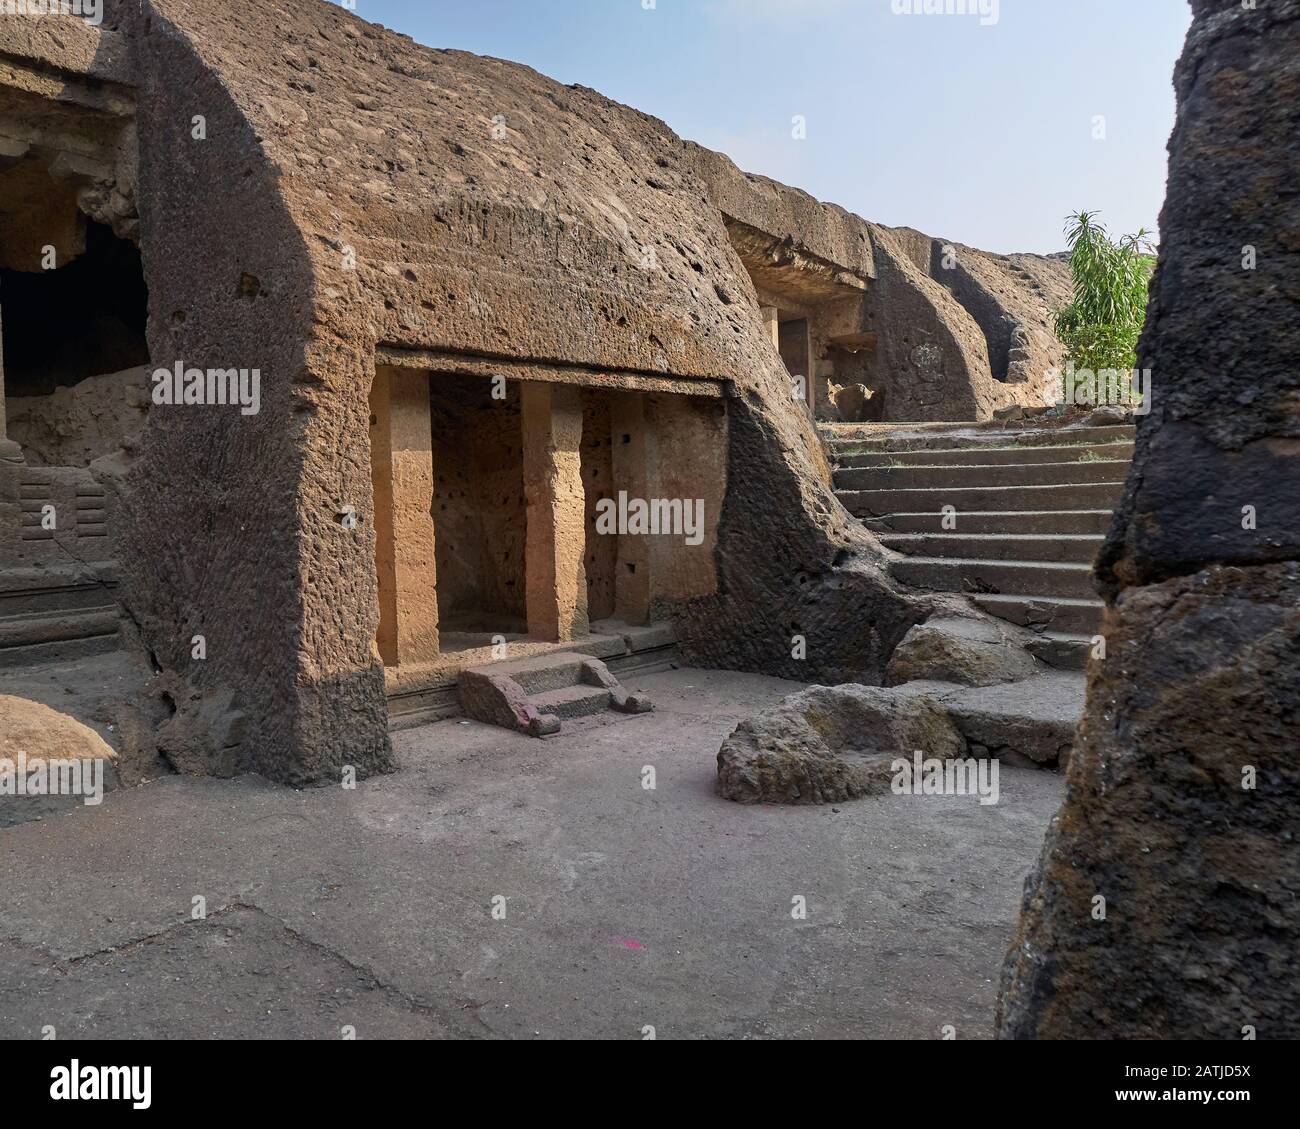 31-Mar-2019- Kondivite or Mahakali Caves are a group of 19 rock-cut monuments built between the 1st century BCE and 6th century CE. Stock Photo